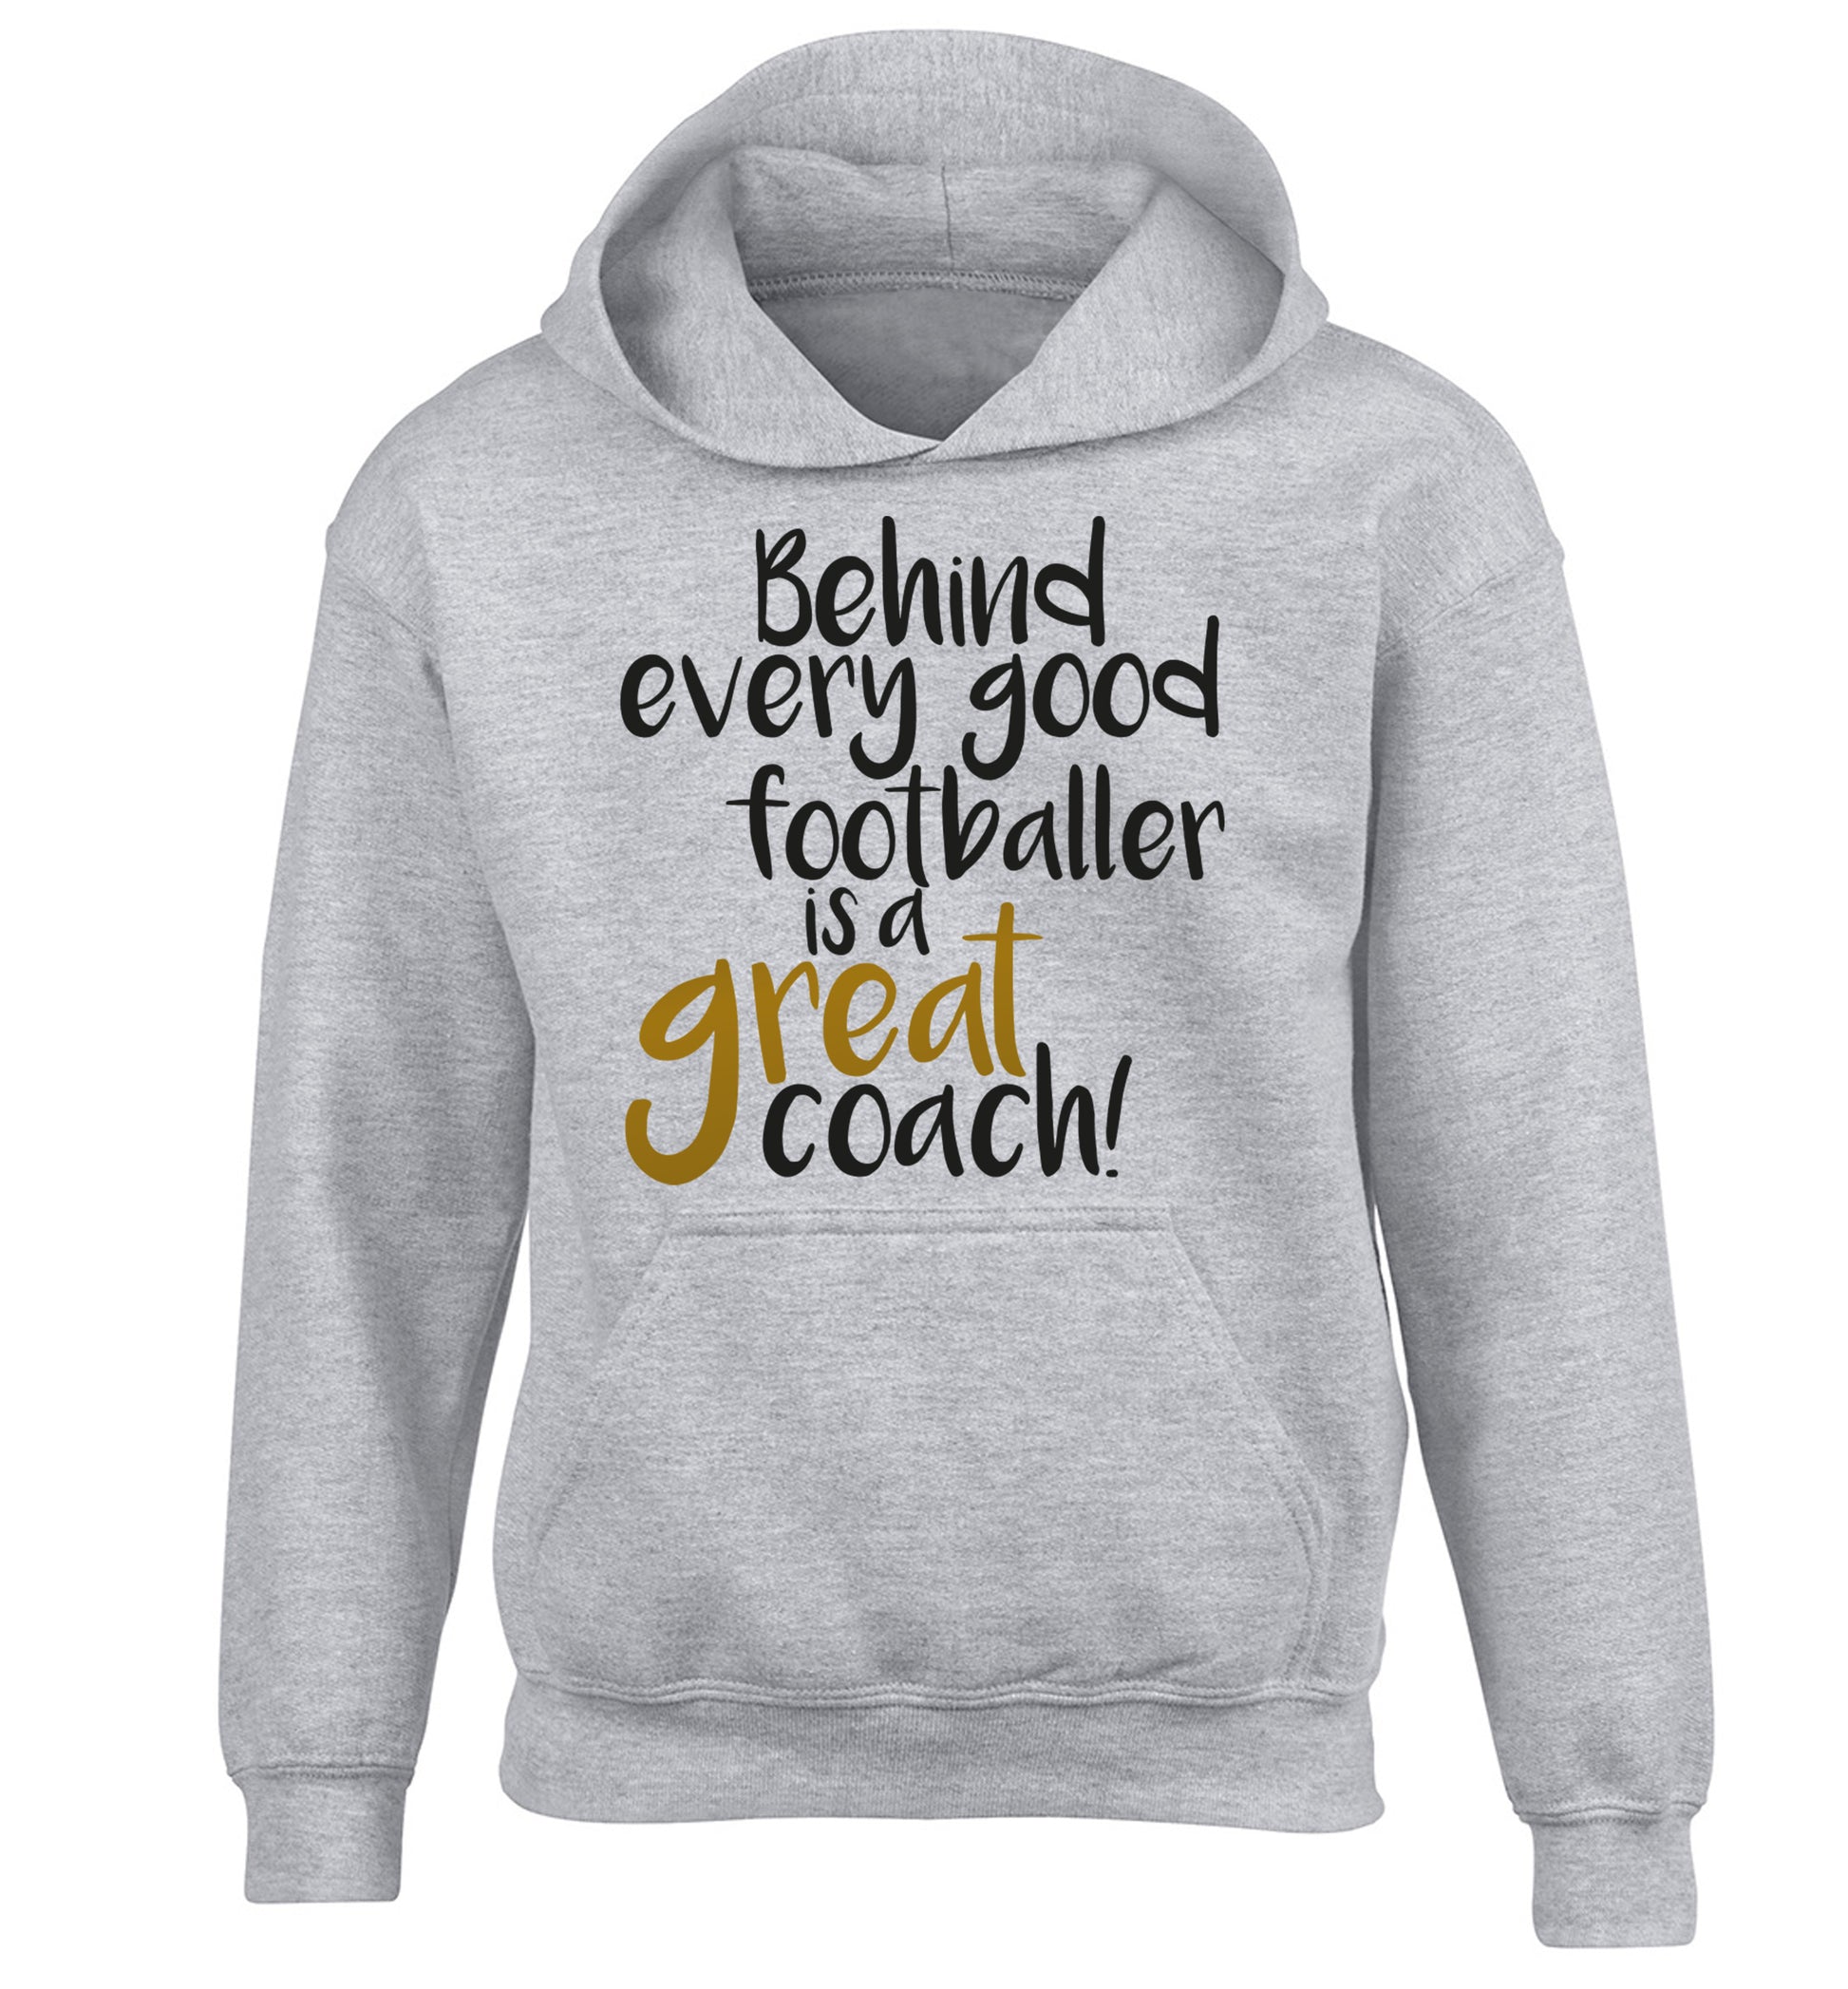 Behind every good footballer is a great coach! children's grey hoodie 12-14 Years